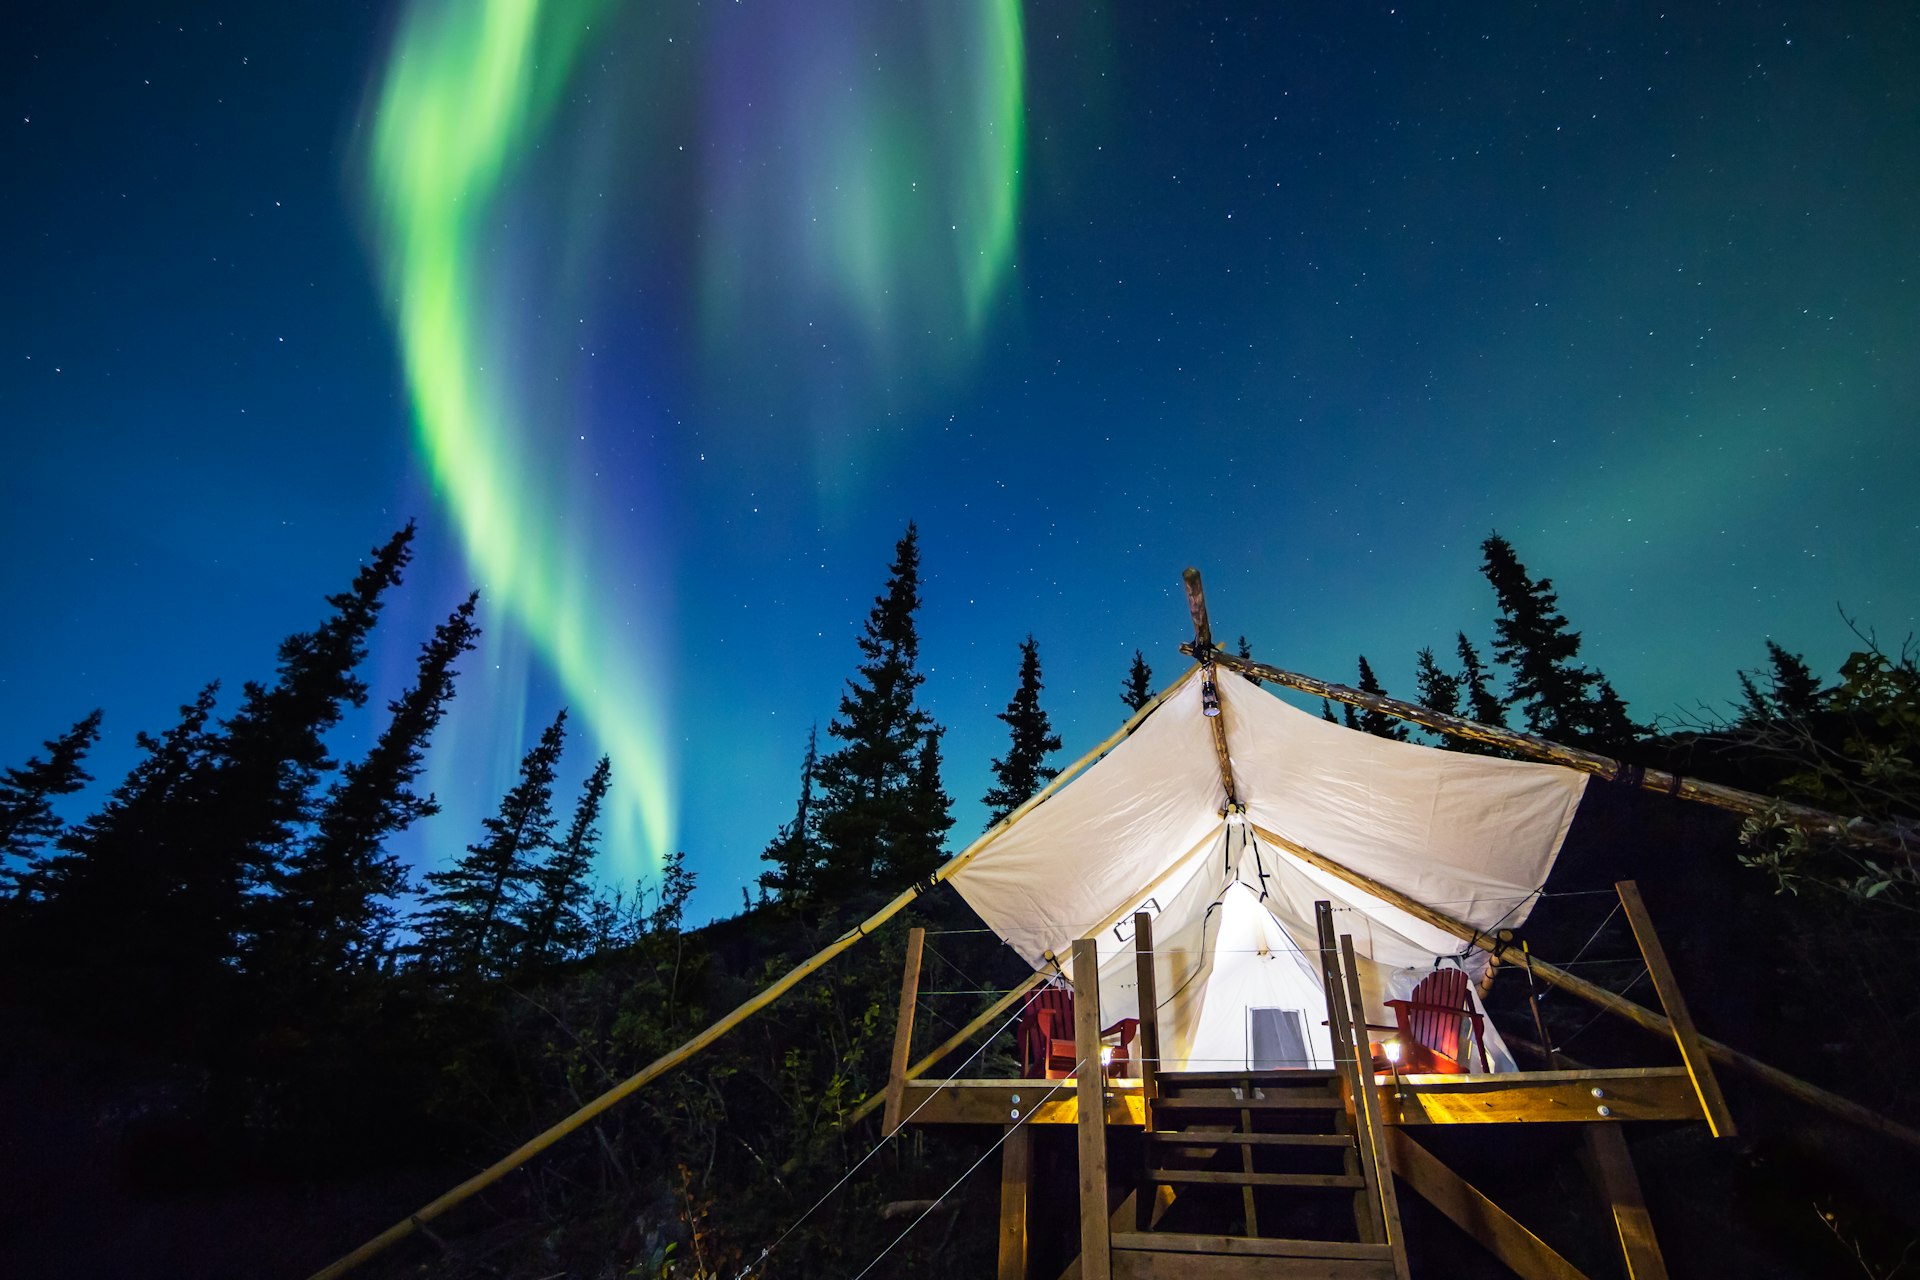 Aurora Borealis glowing green and pink over a large canvas luxury camping tent in Alaska.